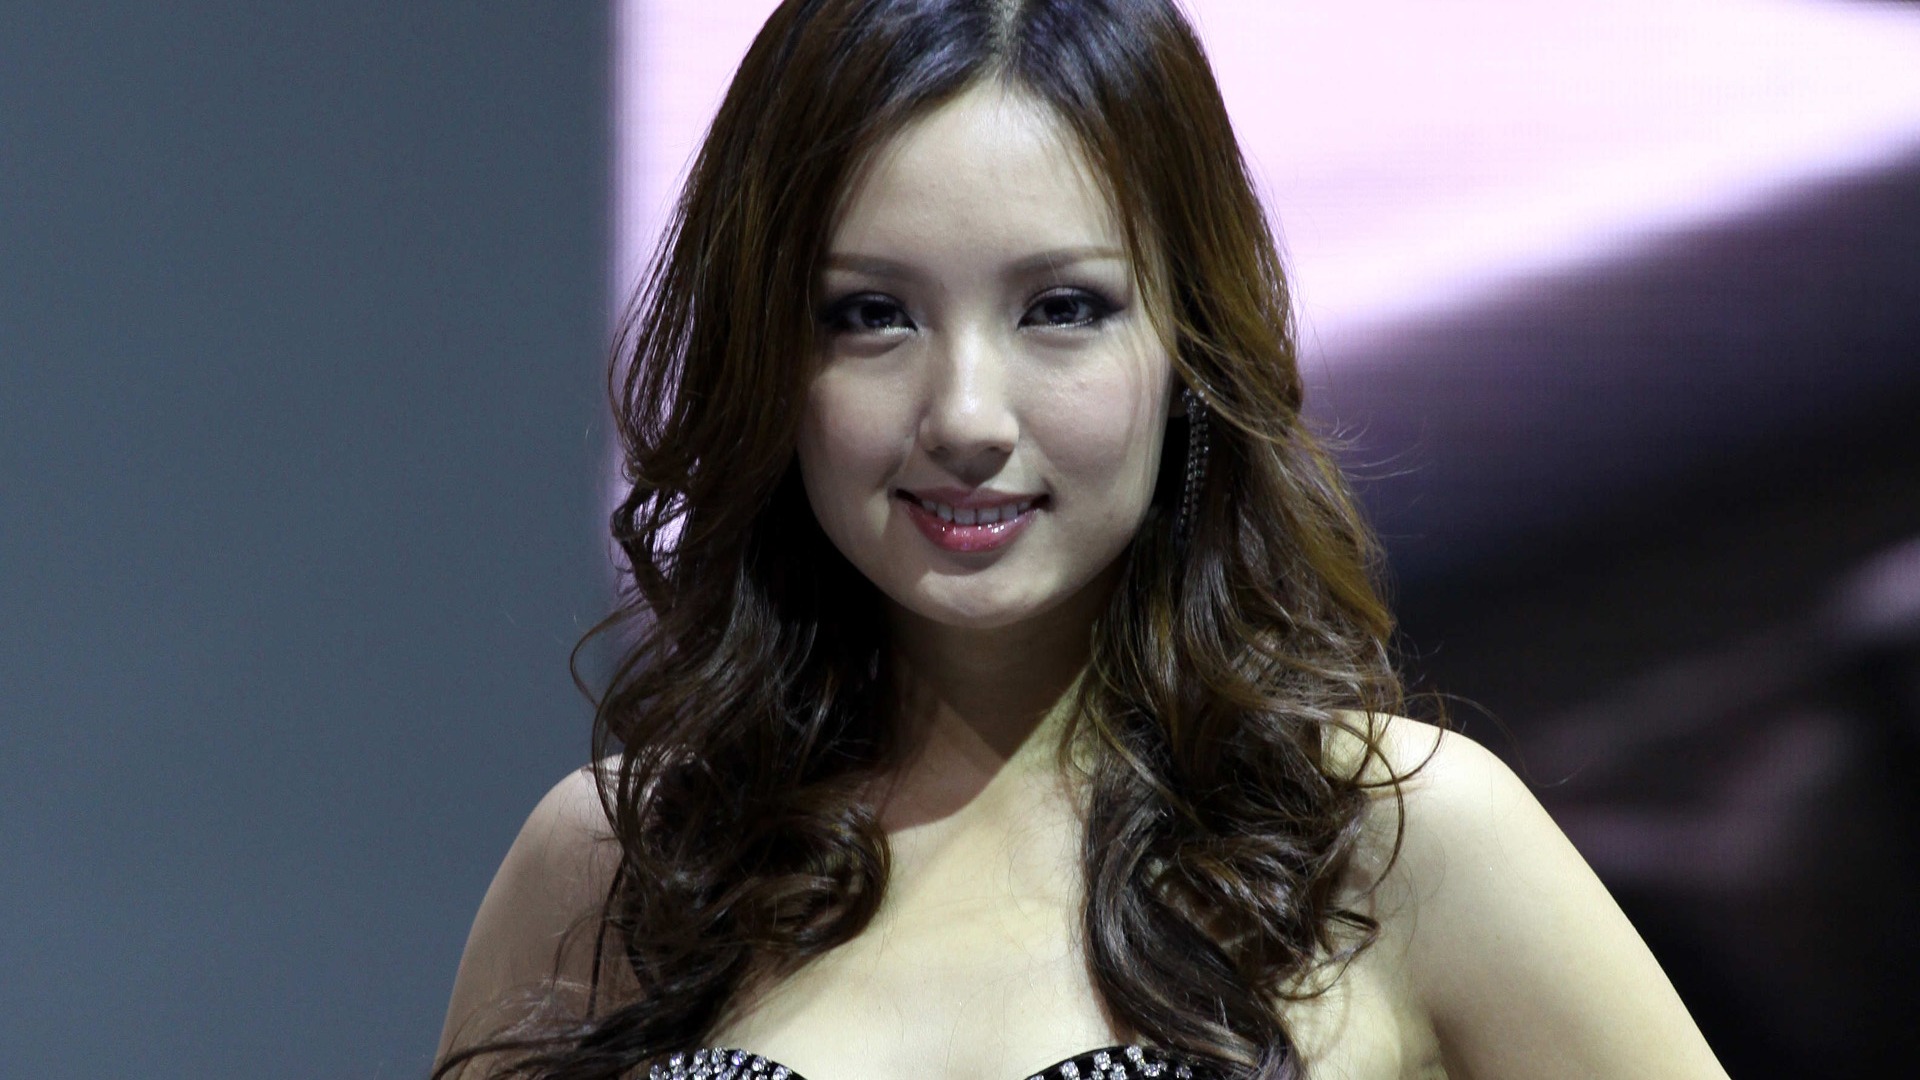 2010 Beijing Auto Show car models Collection (2) #5 - 1920x1080